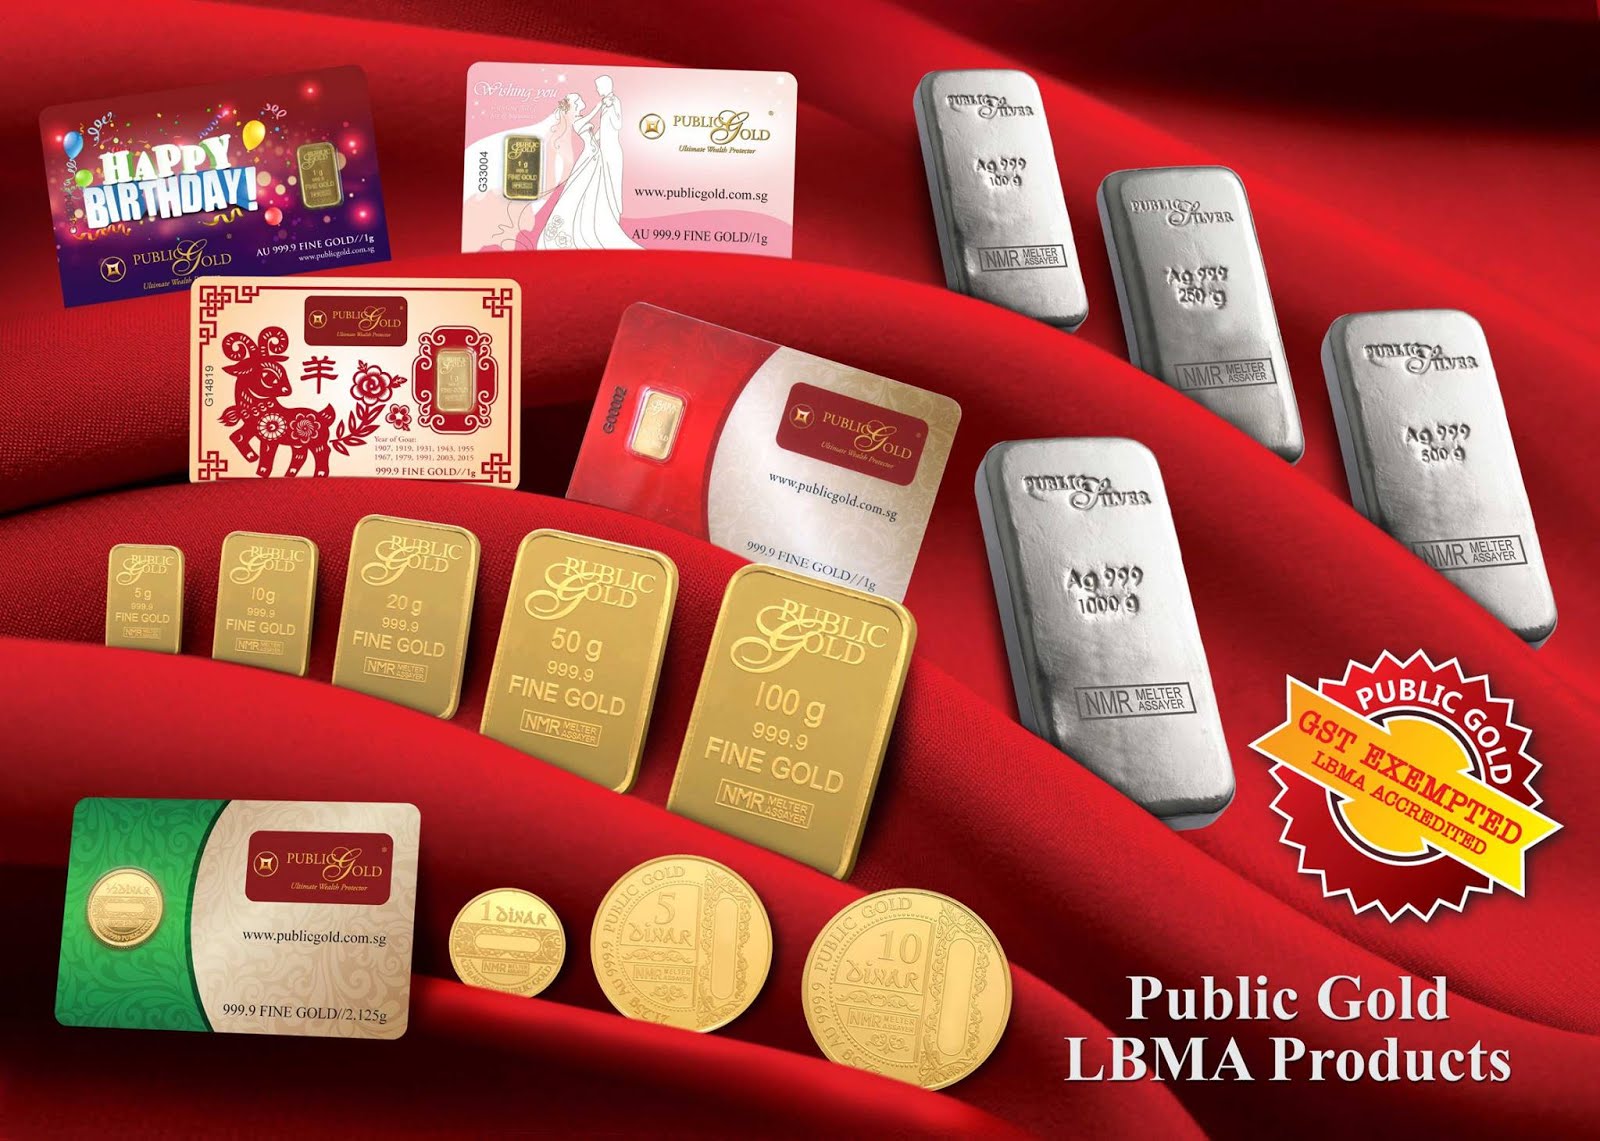 LBMA PRODUCTS